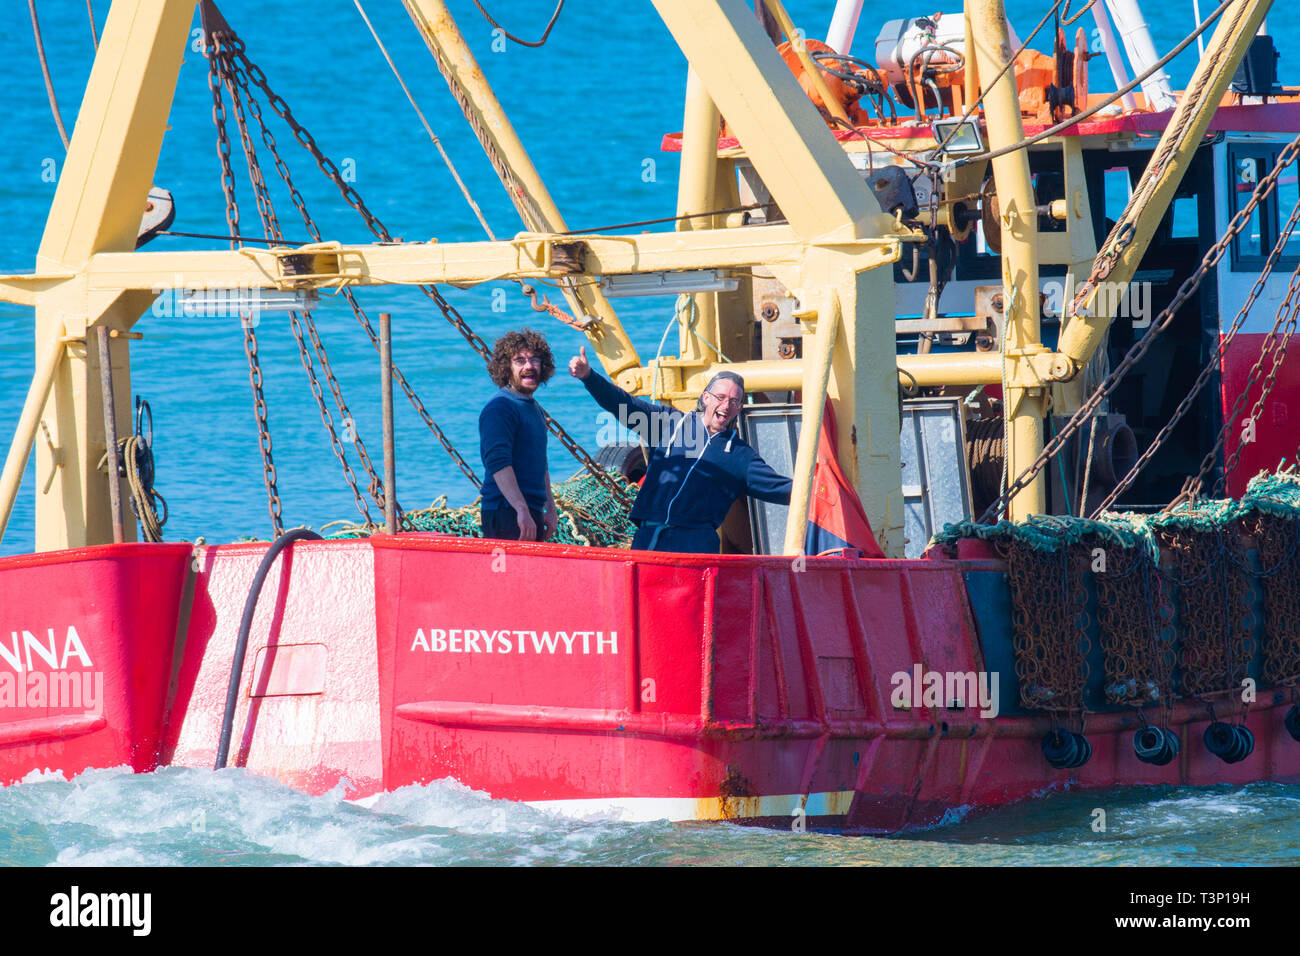 Aberystwyth Wales, UK. 11th Apr, 2019. UK Weather: Local inshore fishermen out in their scallop fishing boat on the calm sea on a gloriously bright and sunny morning in Aberystwyth on the Cardigan Bay coast of west Wales.  Credit: keith morris/Alamy Live News Stock Photo